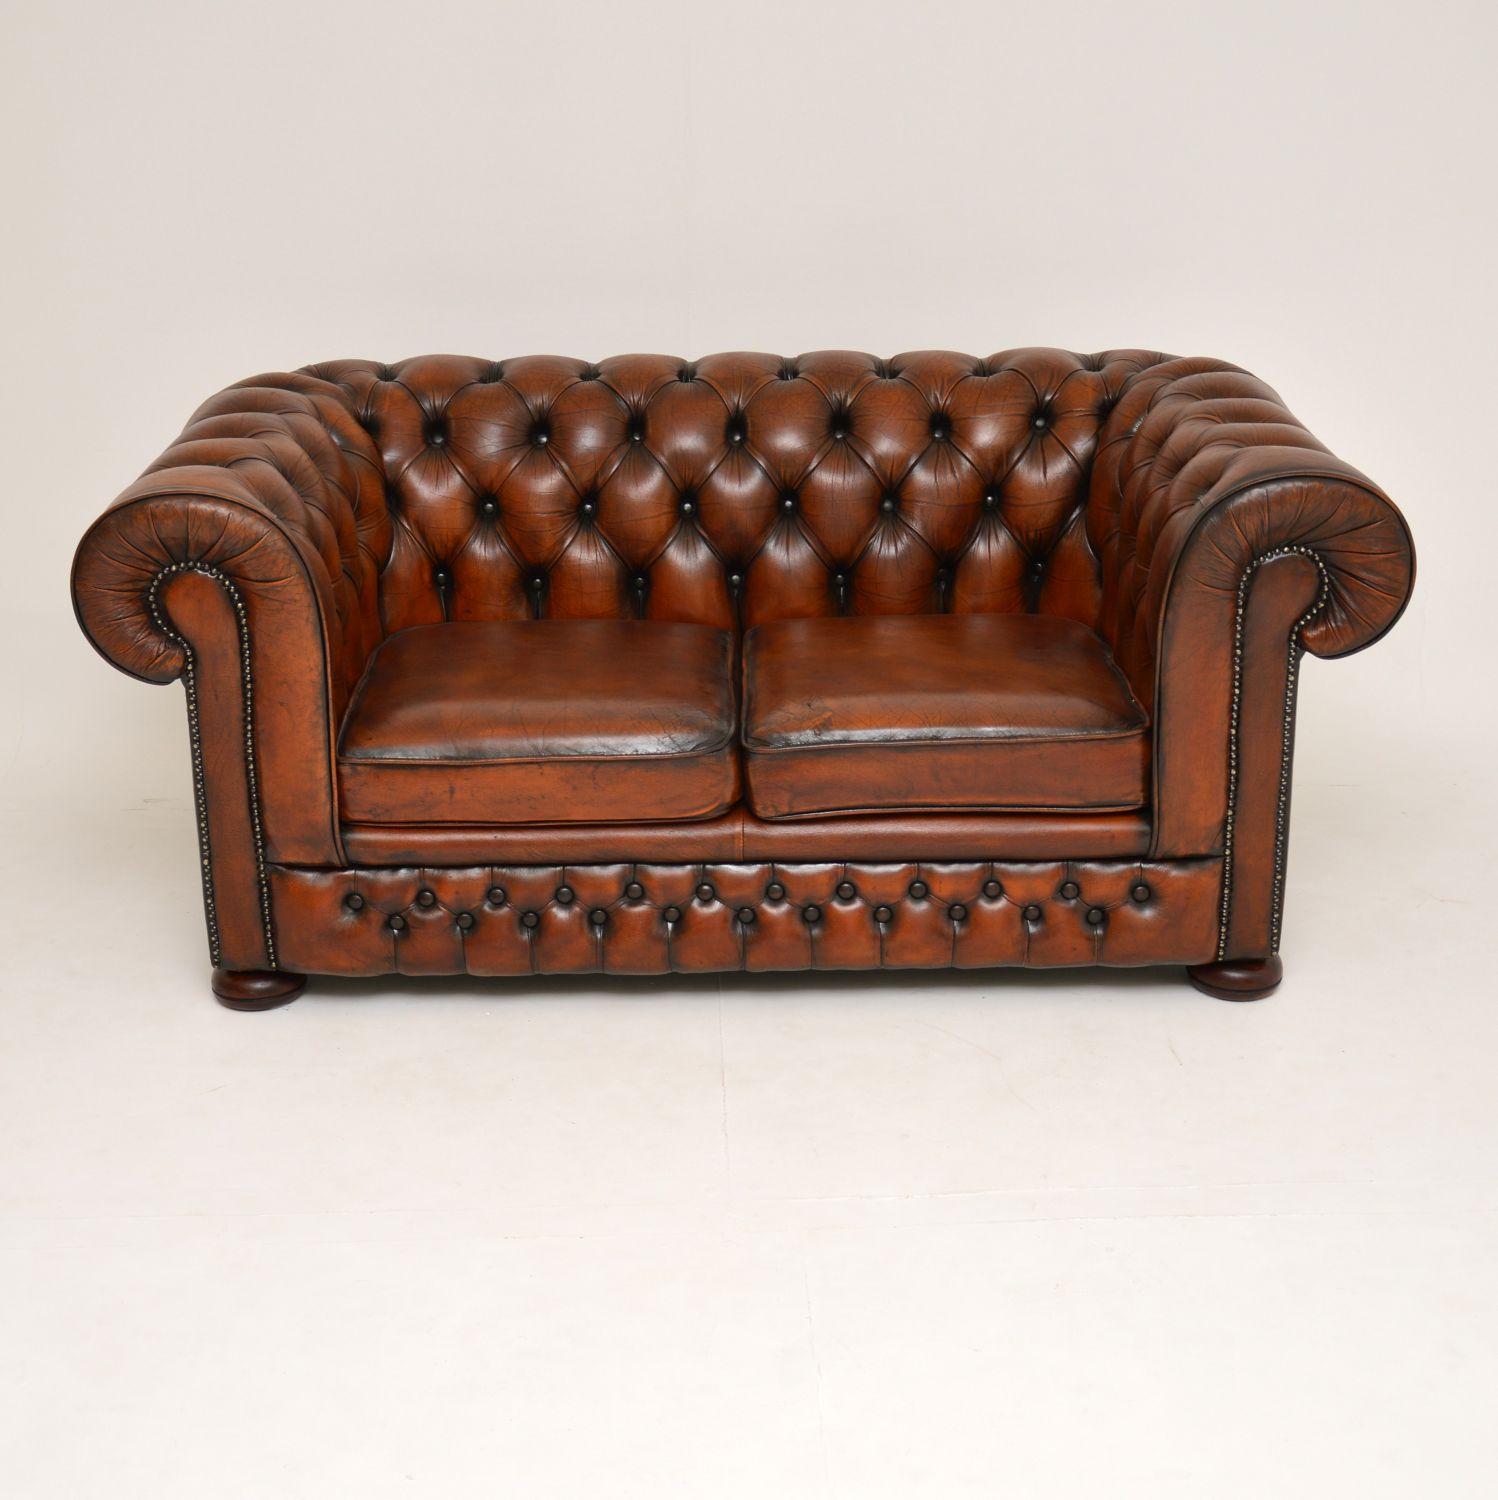 Antique Victorian style 2-seat leather Chesterfield sofa in good original condition and dating to circa 1960s period.

It has a deep buttoned back and arms which roll over the sides and back. There are two loose cushions and it sits on flat bun